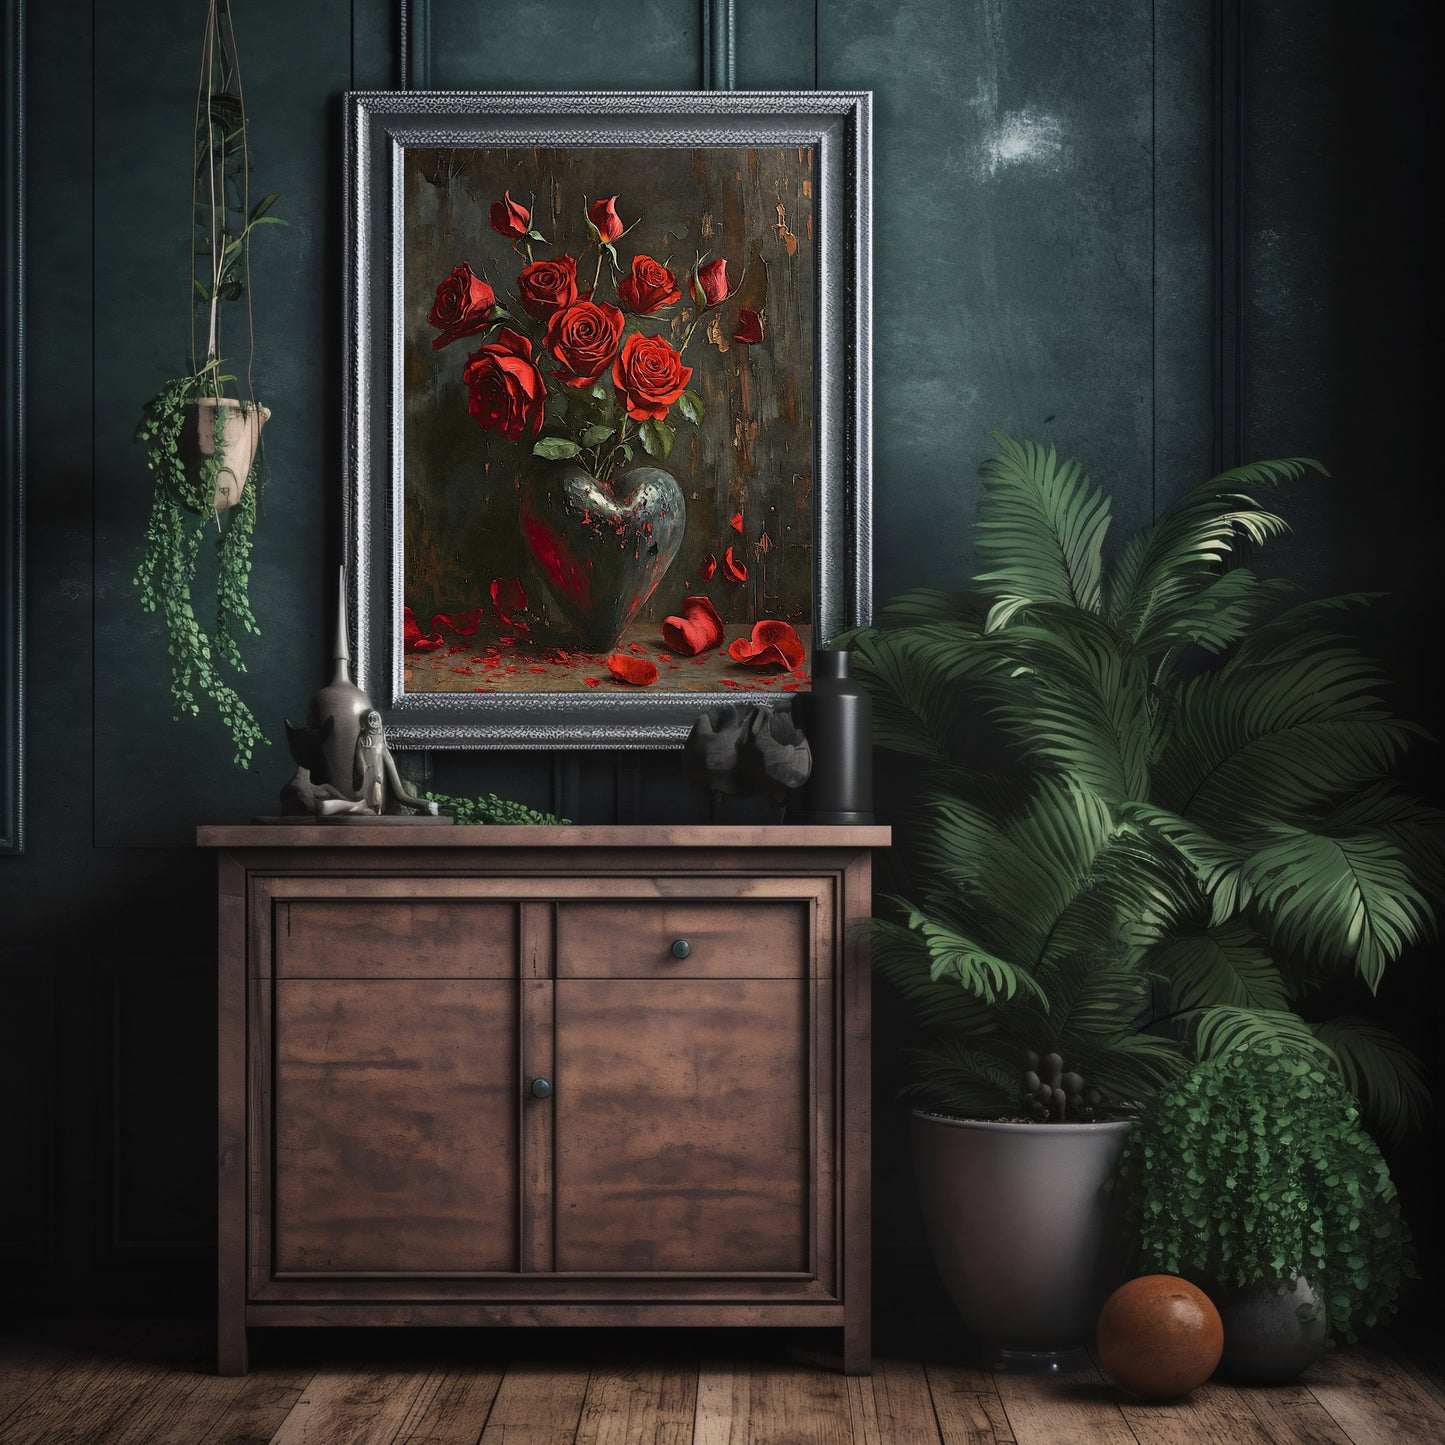 Red Rose Valentine Wall Art Still Life Oil Painting Heart with Red Roses Gothic Decor Goblincore Decor Dark Romance Print Paper Poster Print